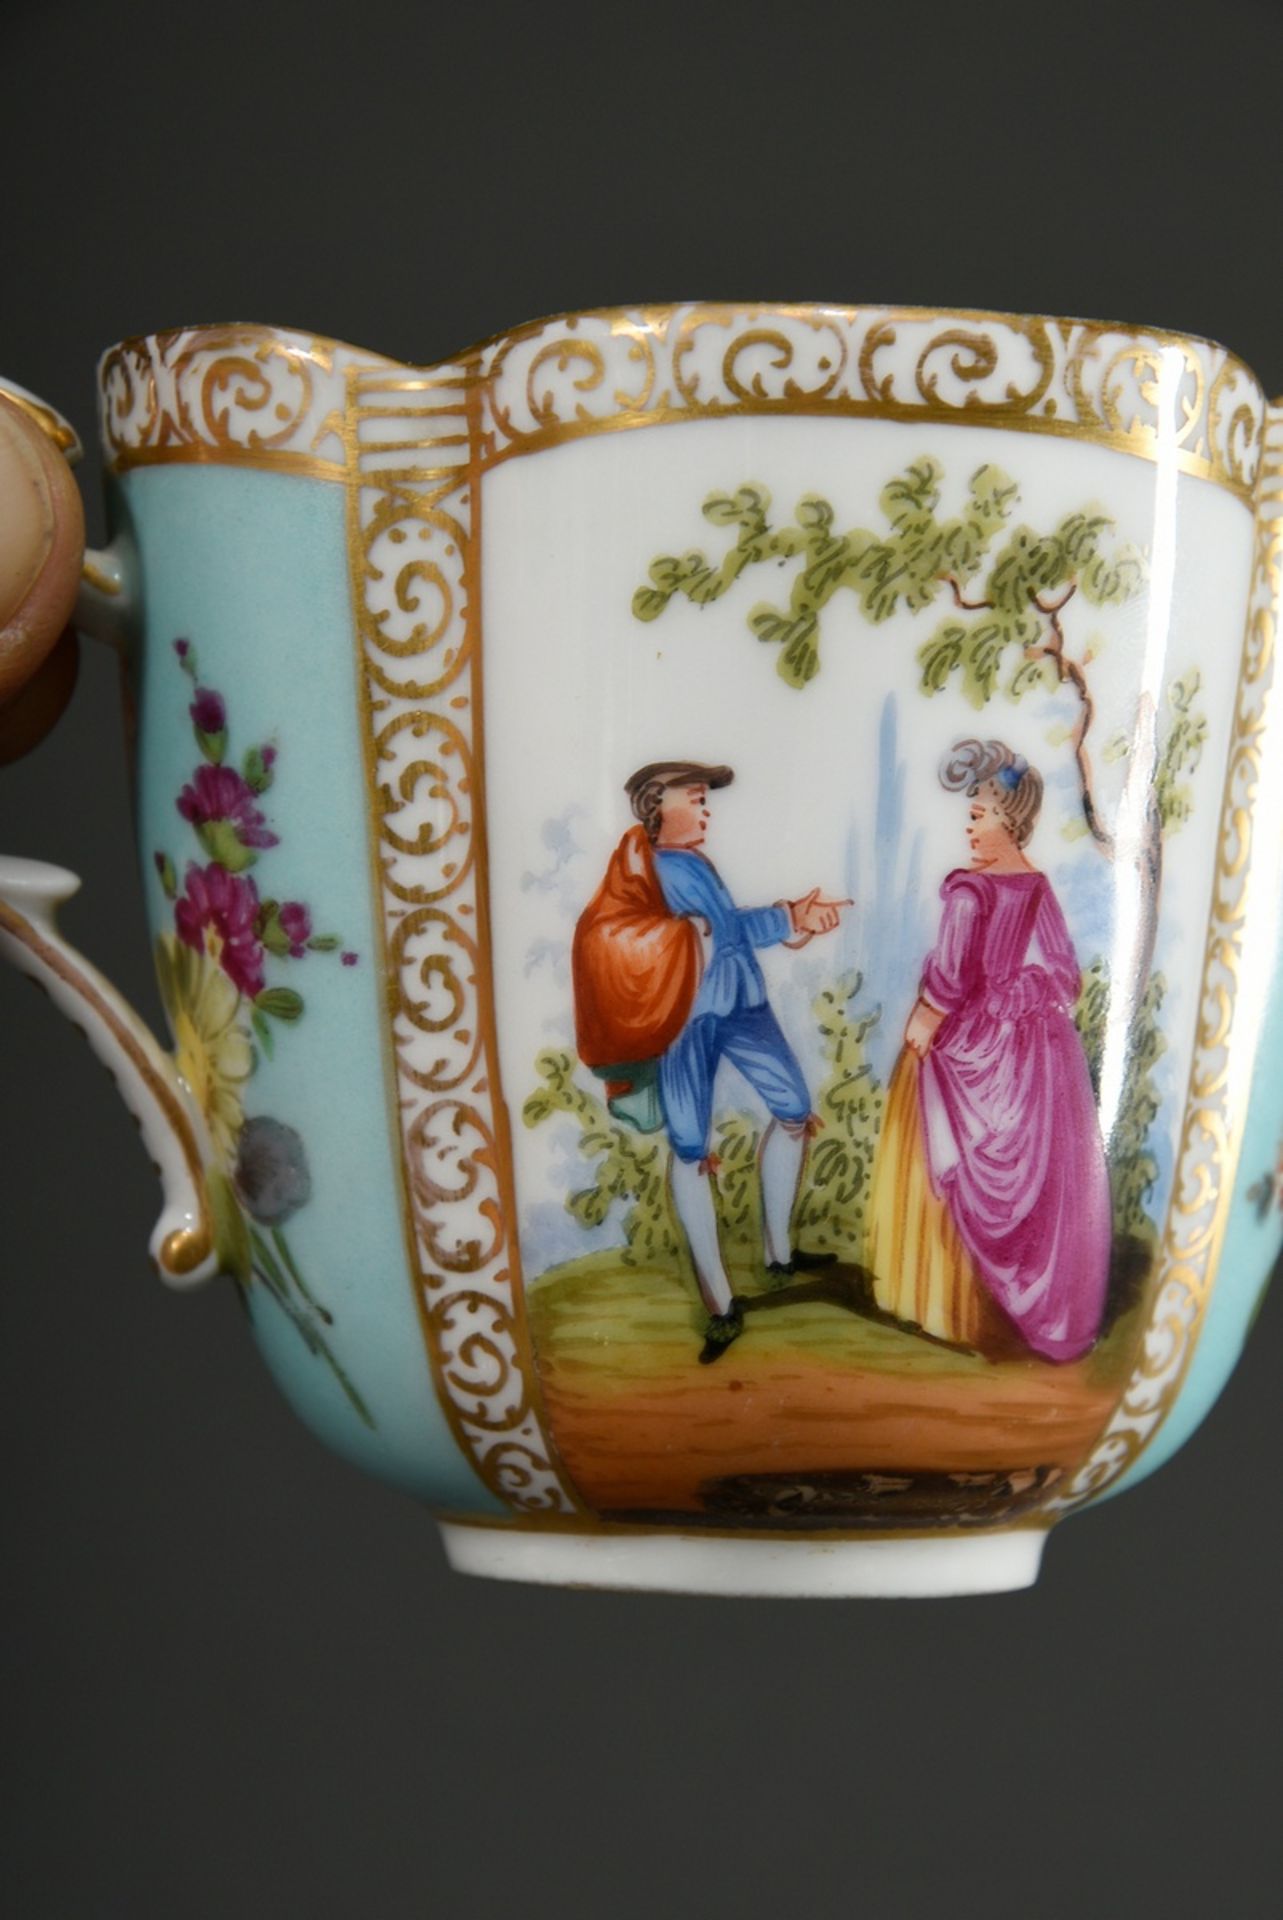 A four-piece porcelain cup/saucer with polychrome painting "Lovers" and "Blossoms" on a turquoise b - Image 5 of 8